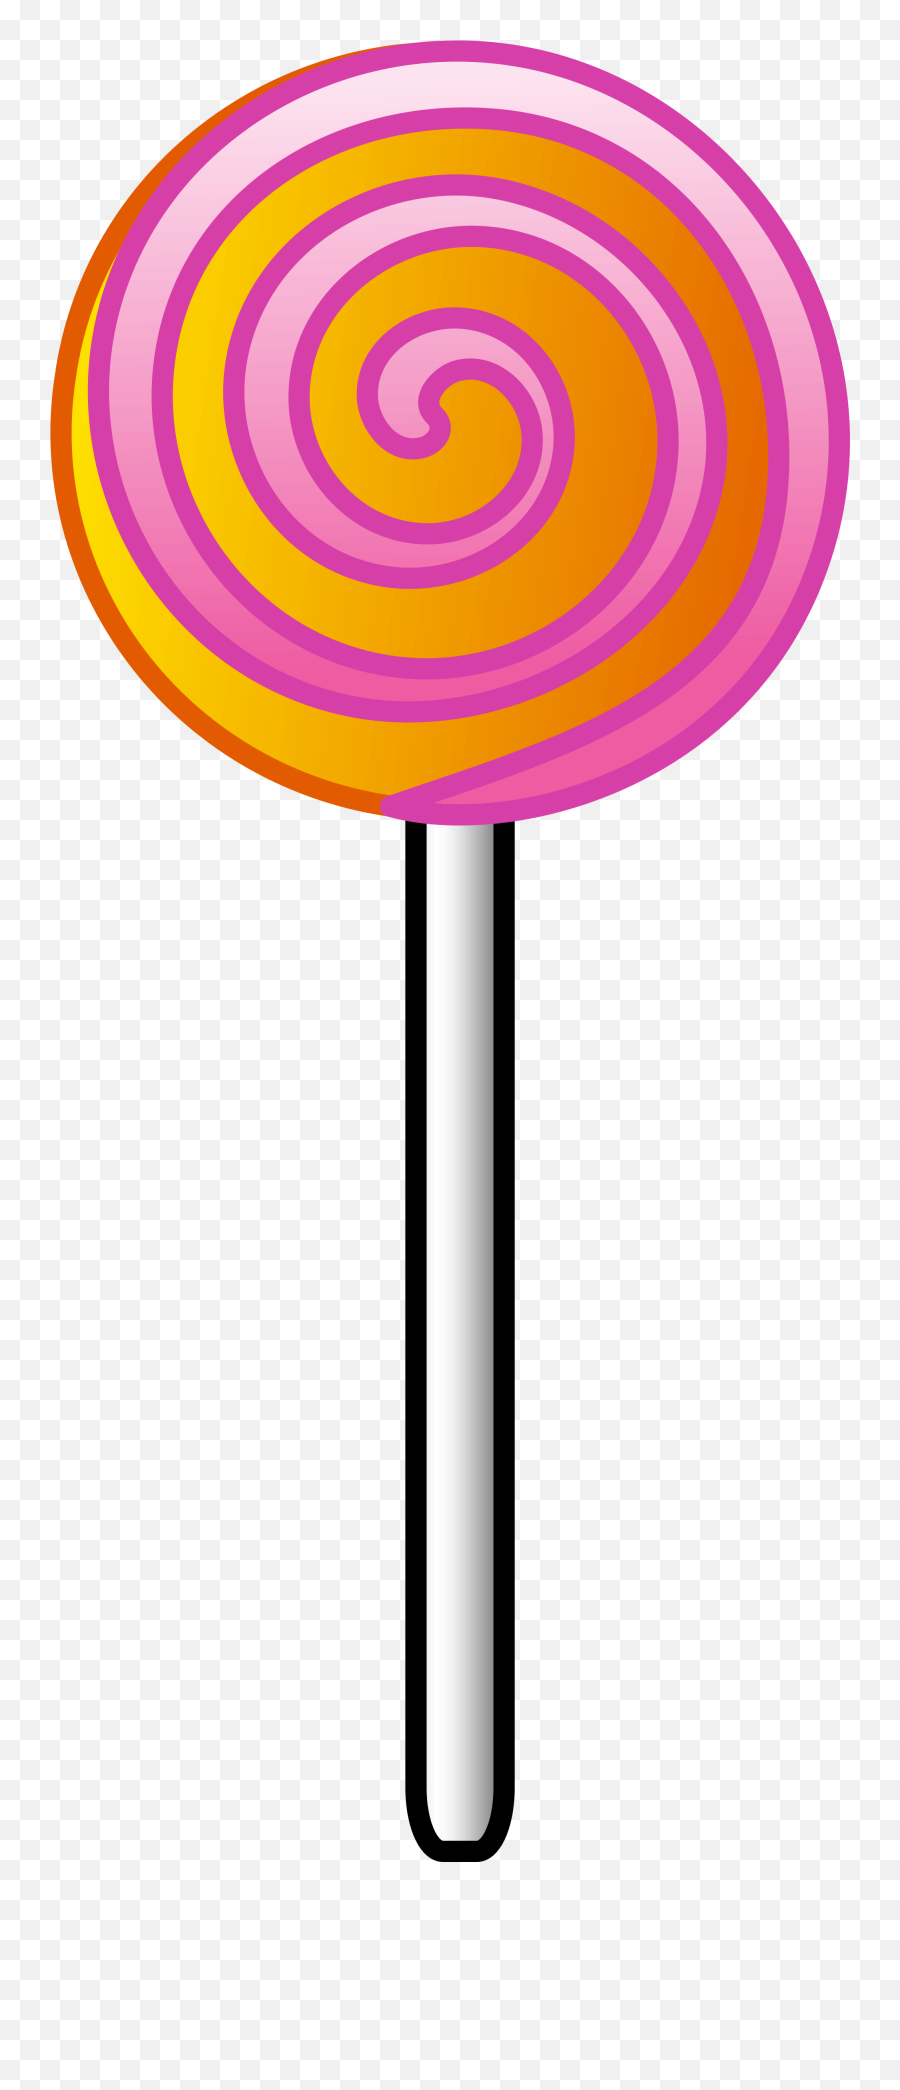 Gumball Machine Vector Free - Clip Art Library Lollipop Clipart Emoji,Gumball Machine Clipart